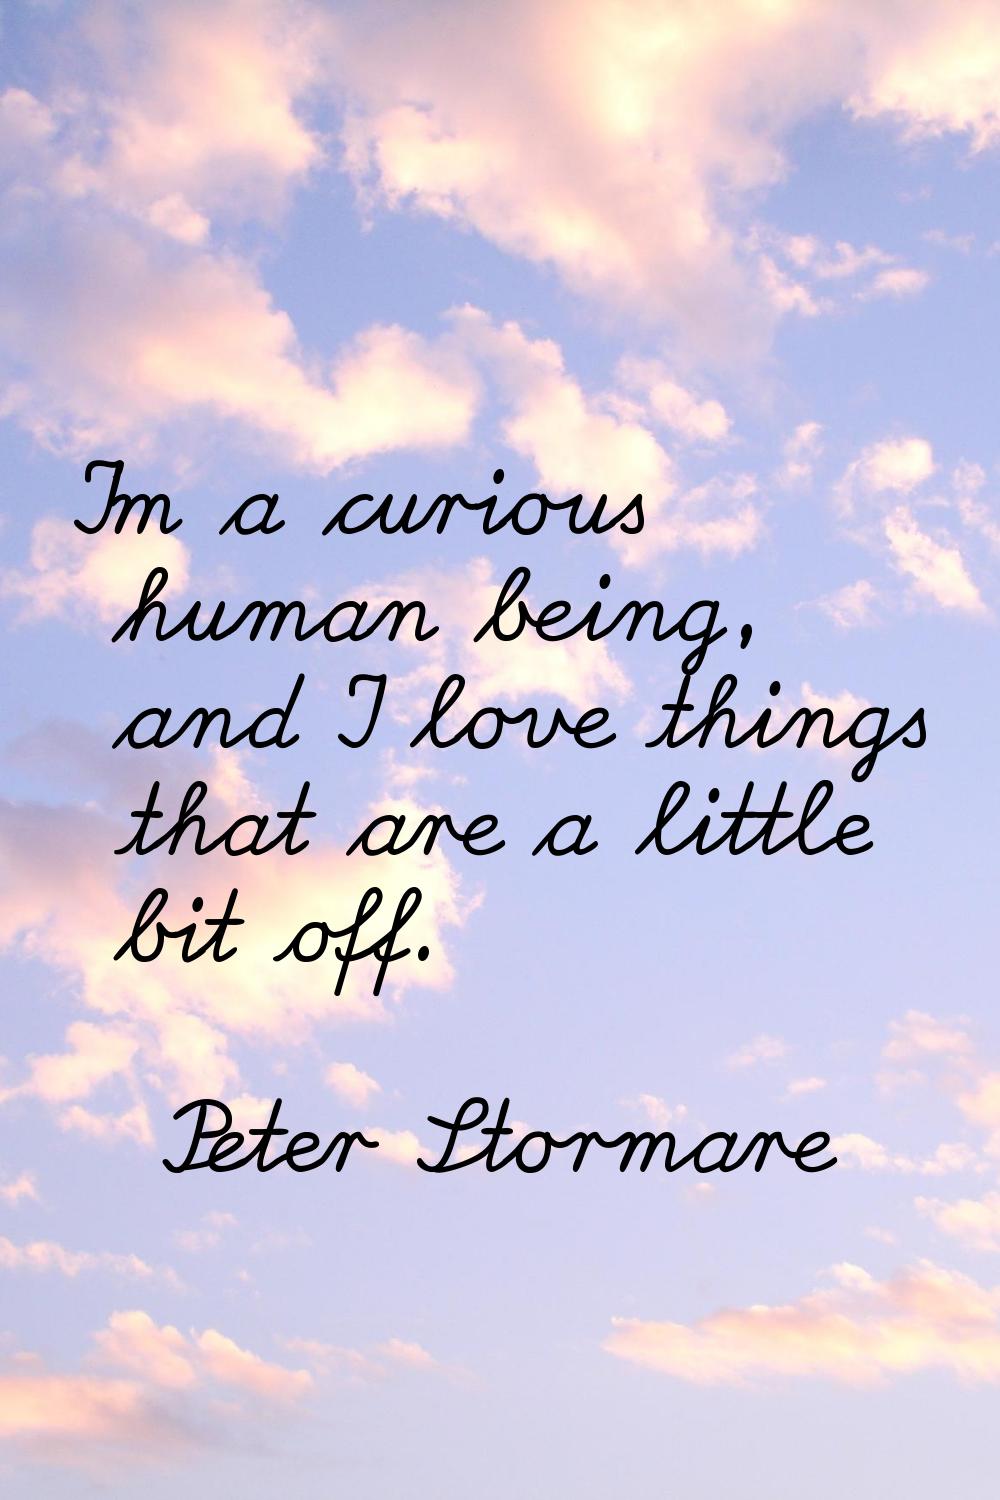 I'm a curious human being, and I love things that are a little bit off.